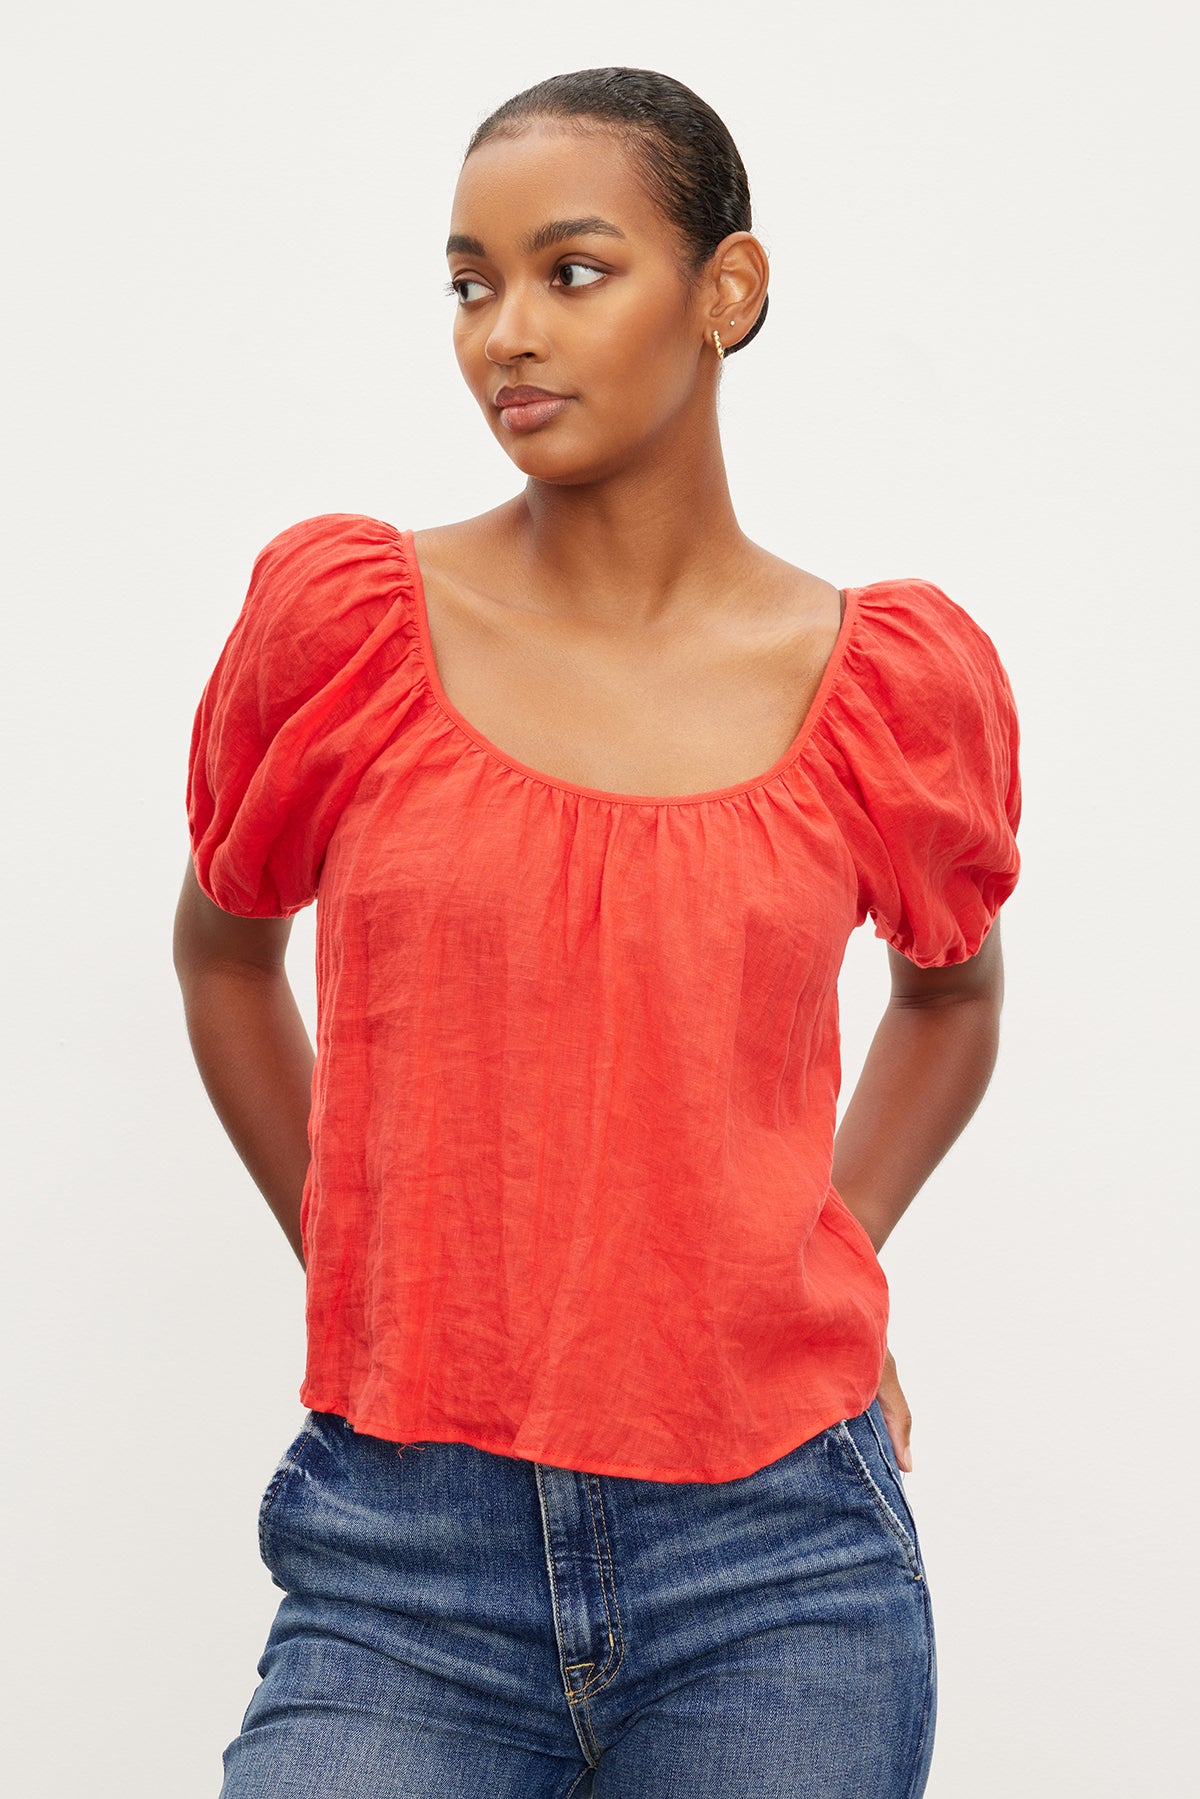   The model is wearing a Velvet by Graham & Spencer DANA LINEN SCOOP NECK TOP with puff sleeves. 